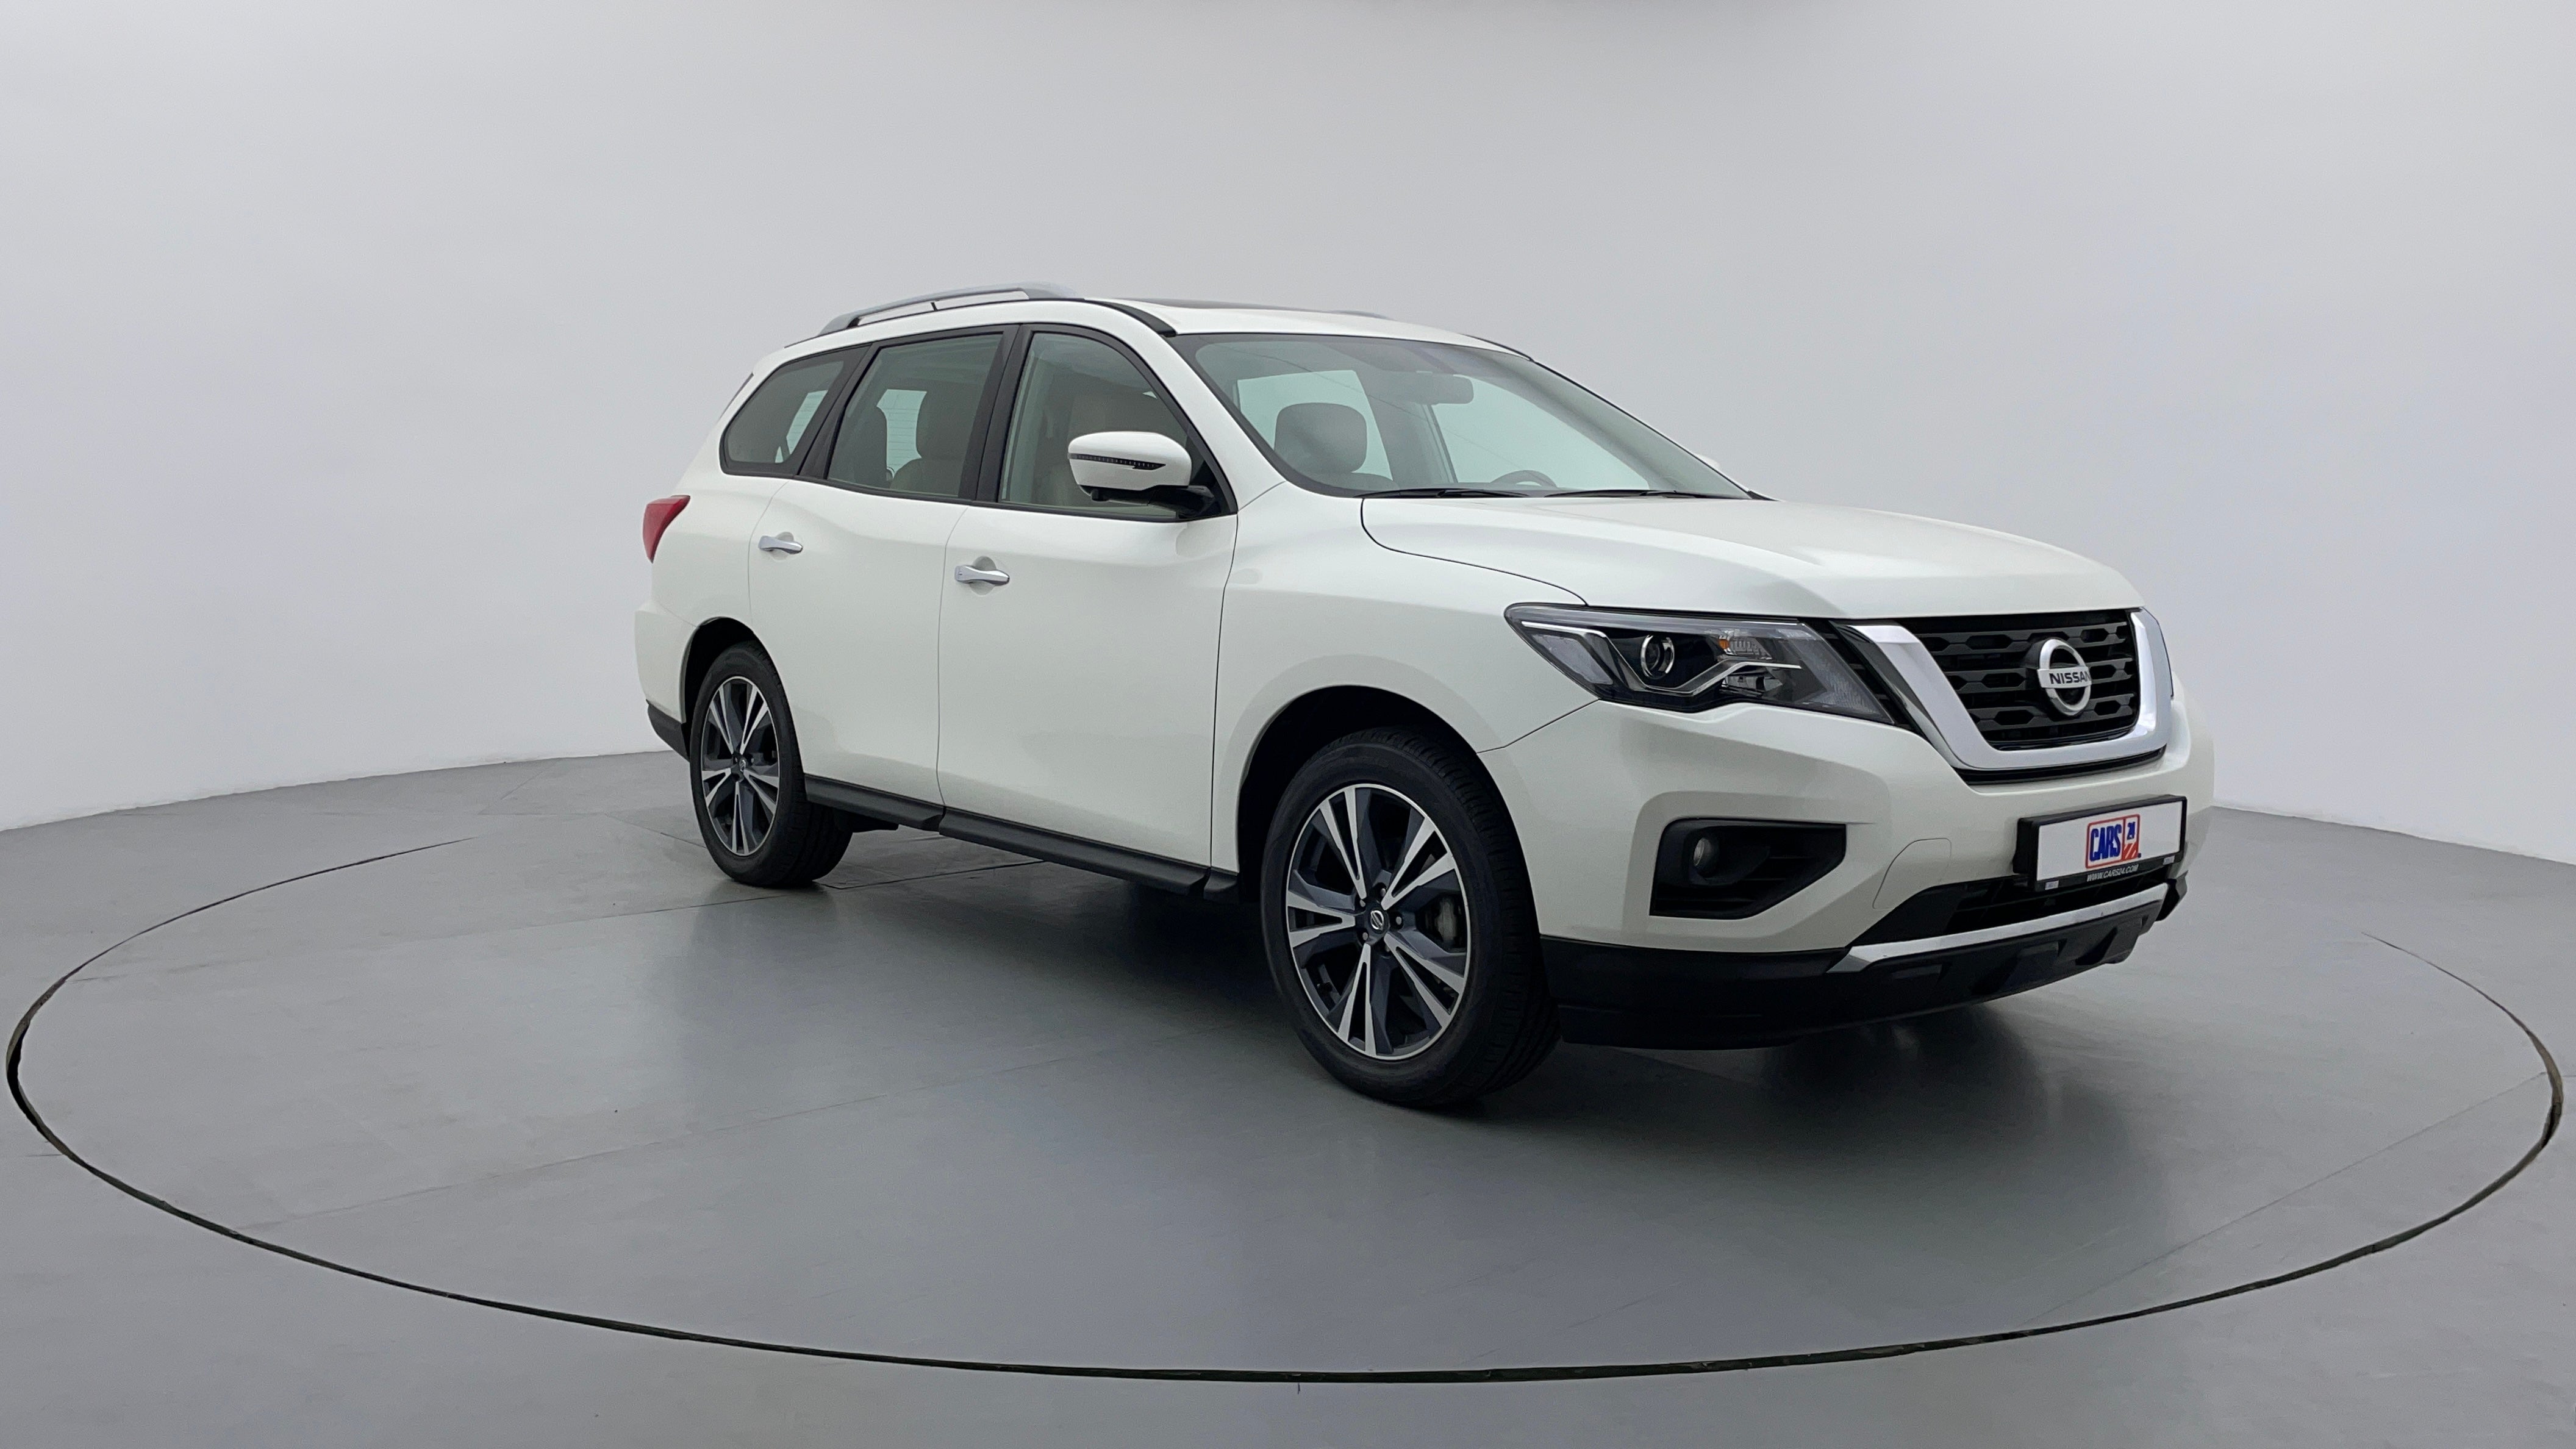 Nissan Pathfinder-Right Front Diagonal (45- Degree) View